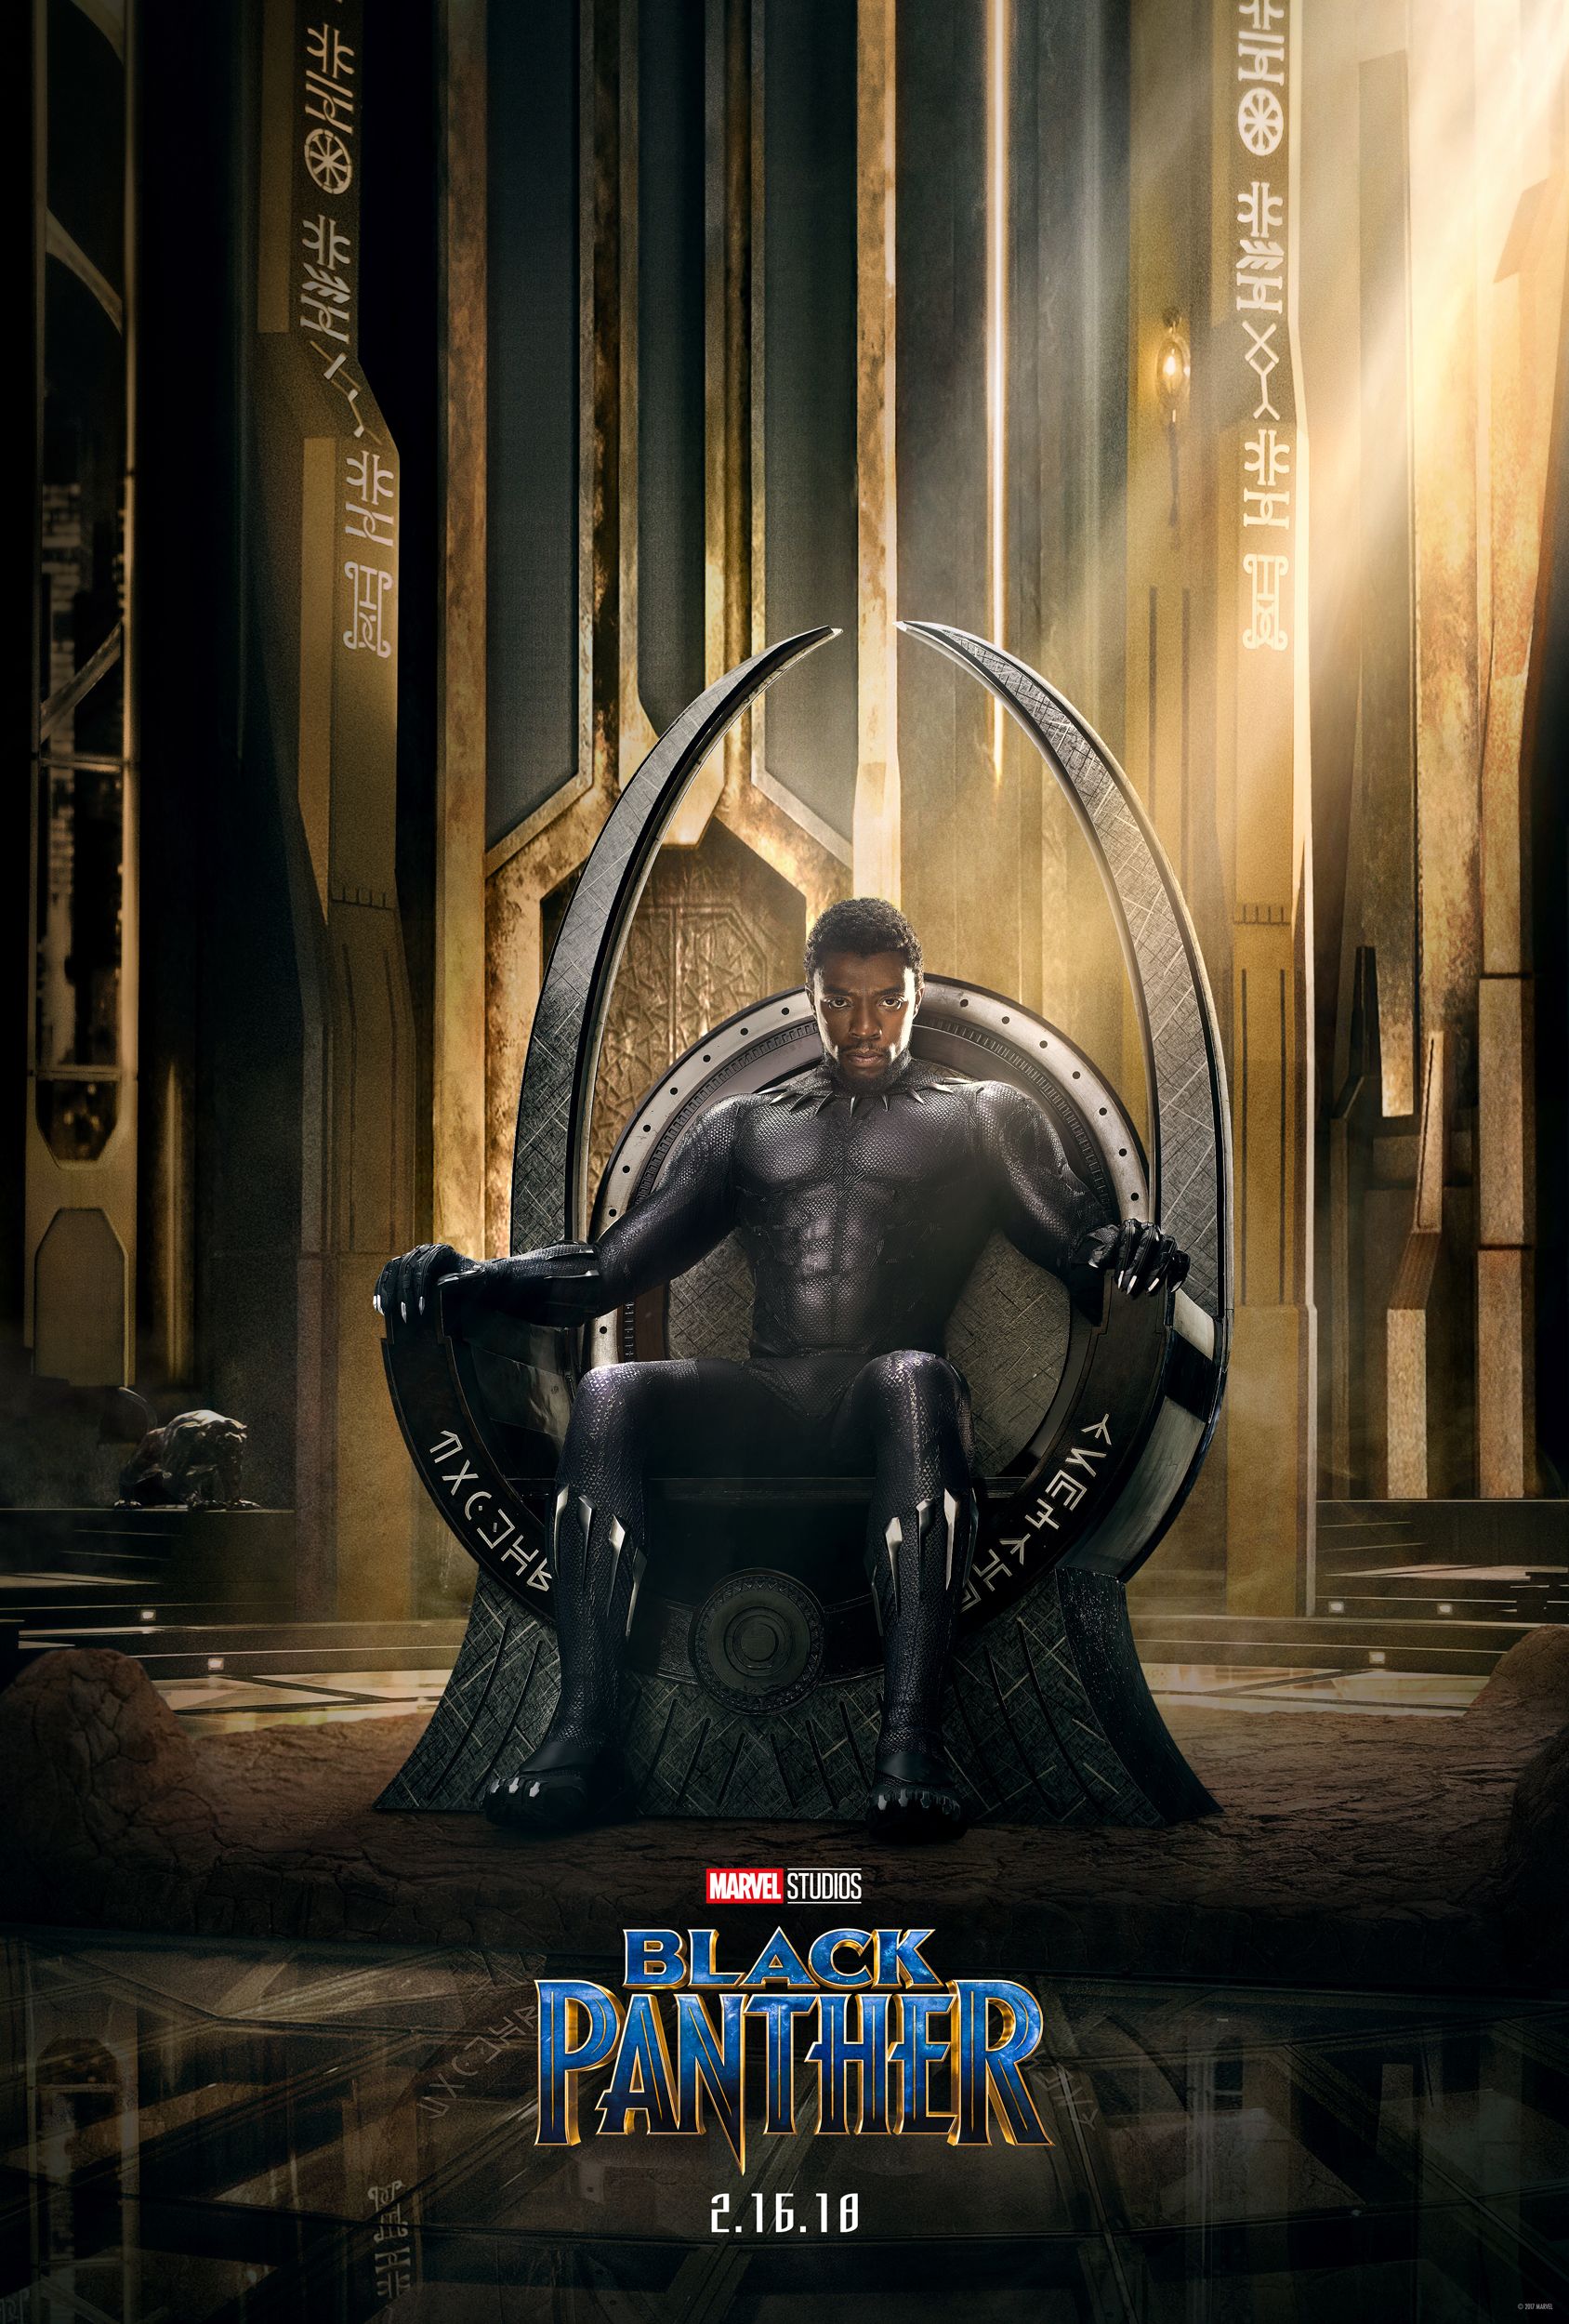 「black panther poster」の画像検索結果